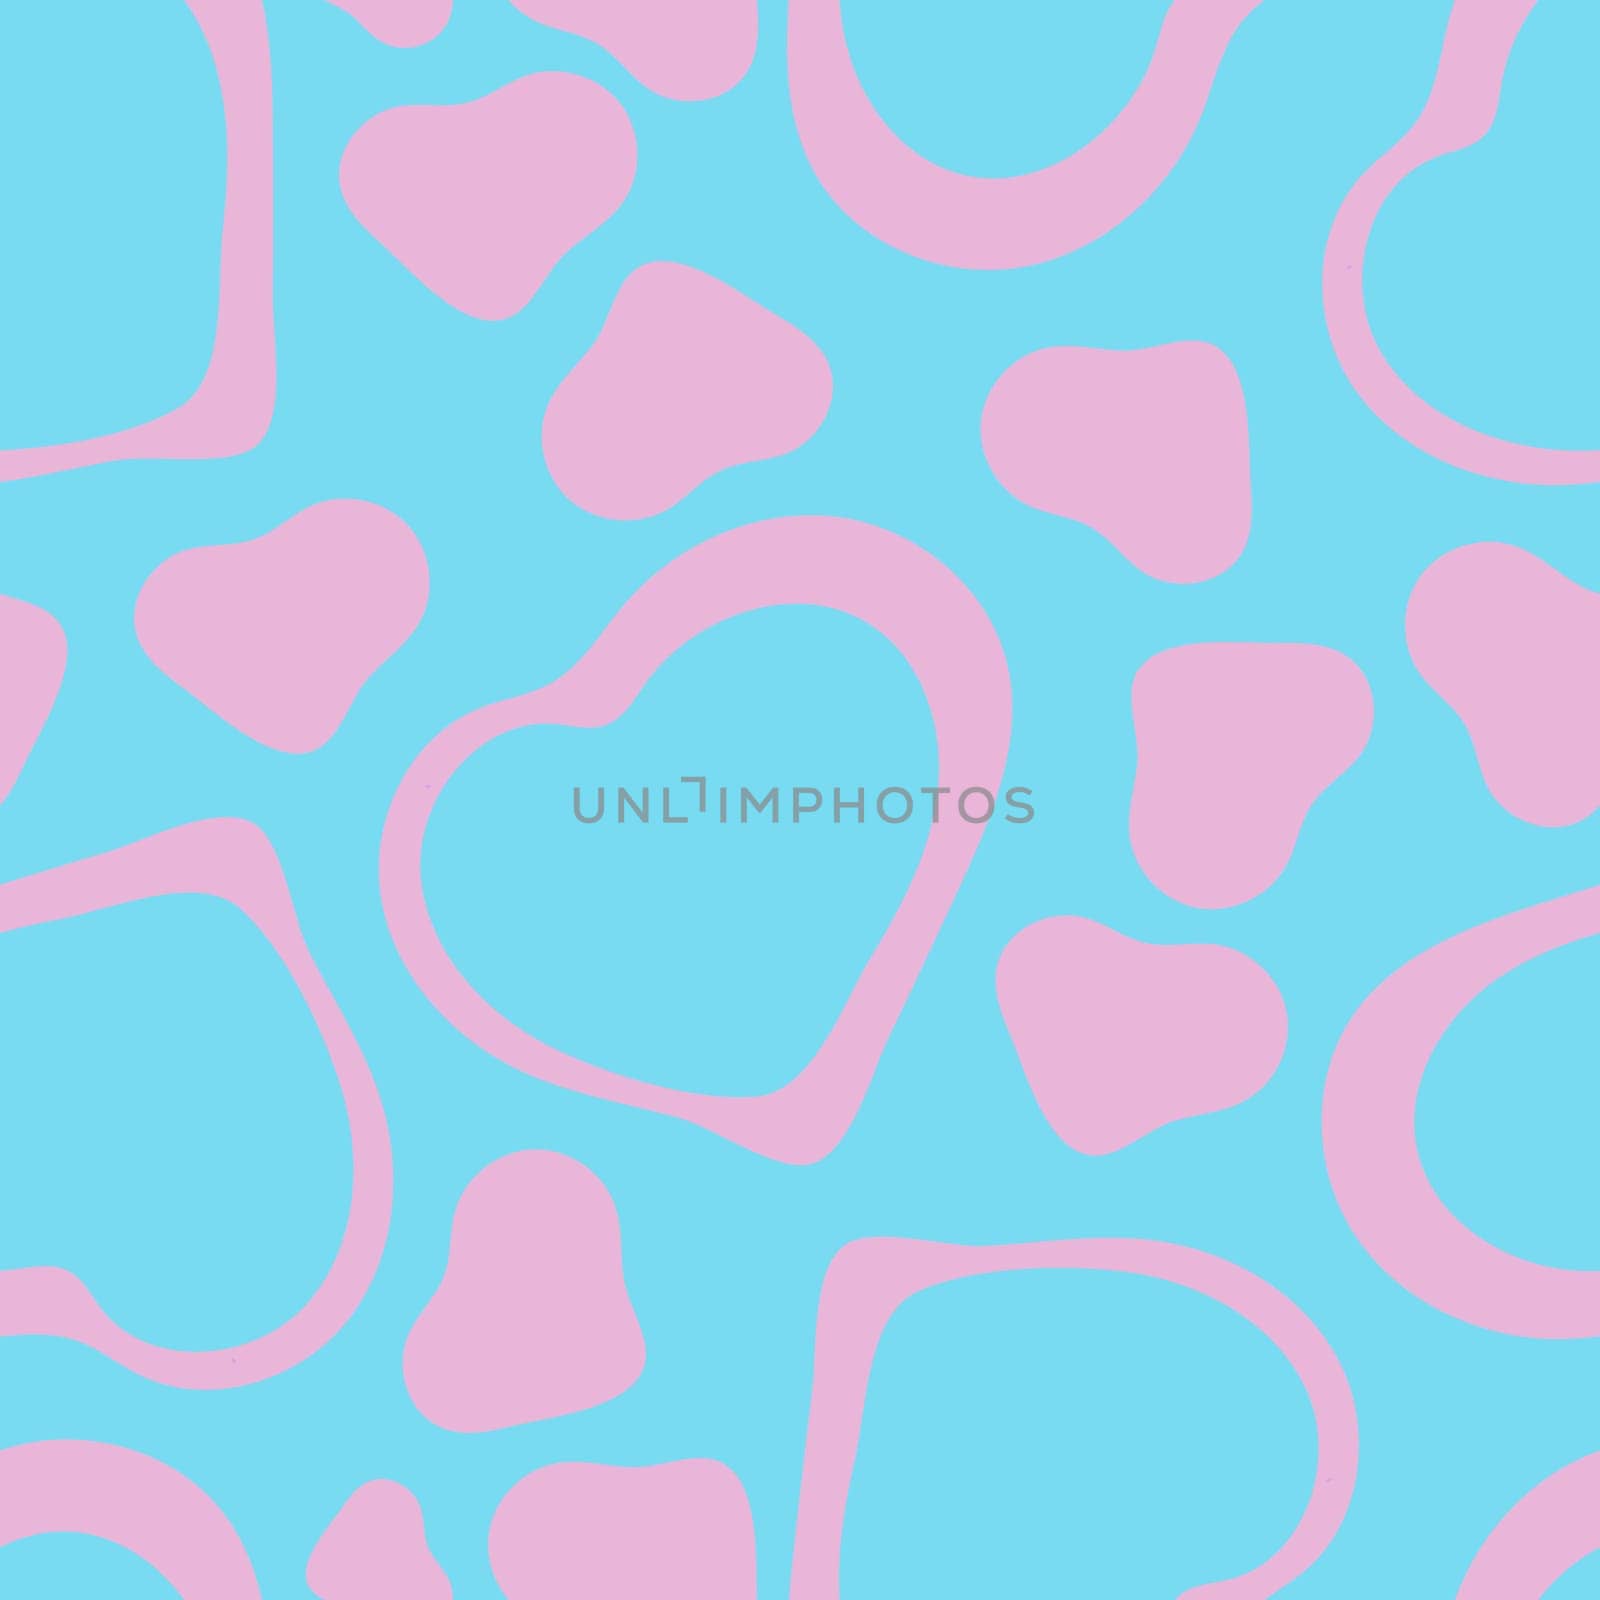 Hand Drawn Seamless Patterns with Hearts in Doodle Style. by Rina_Dozornaya